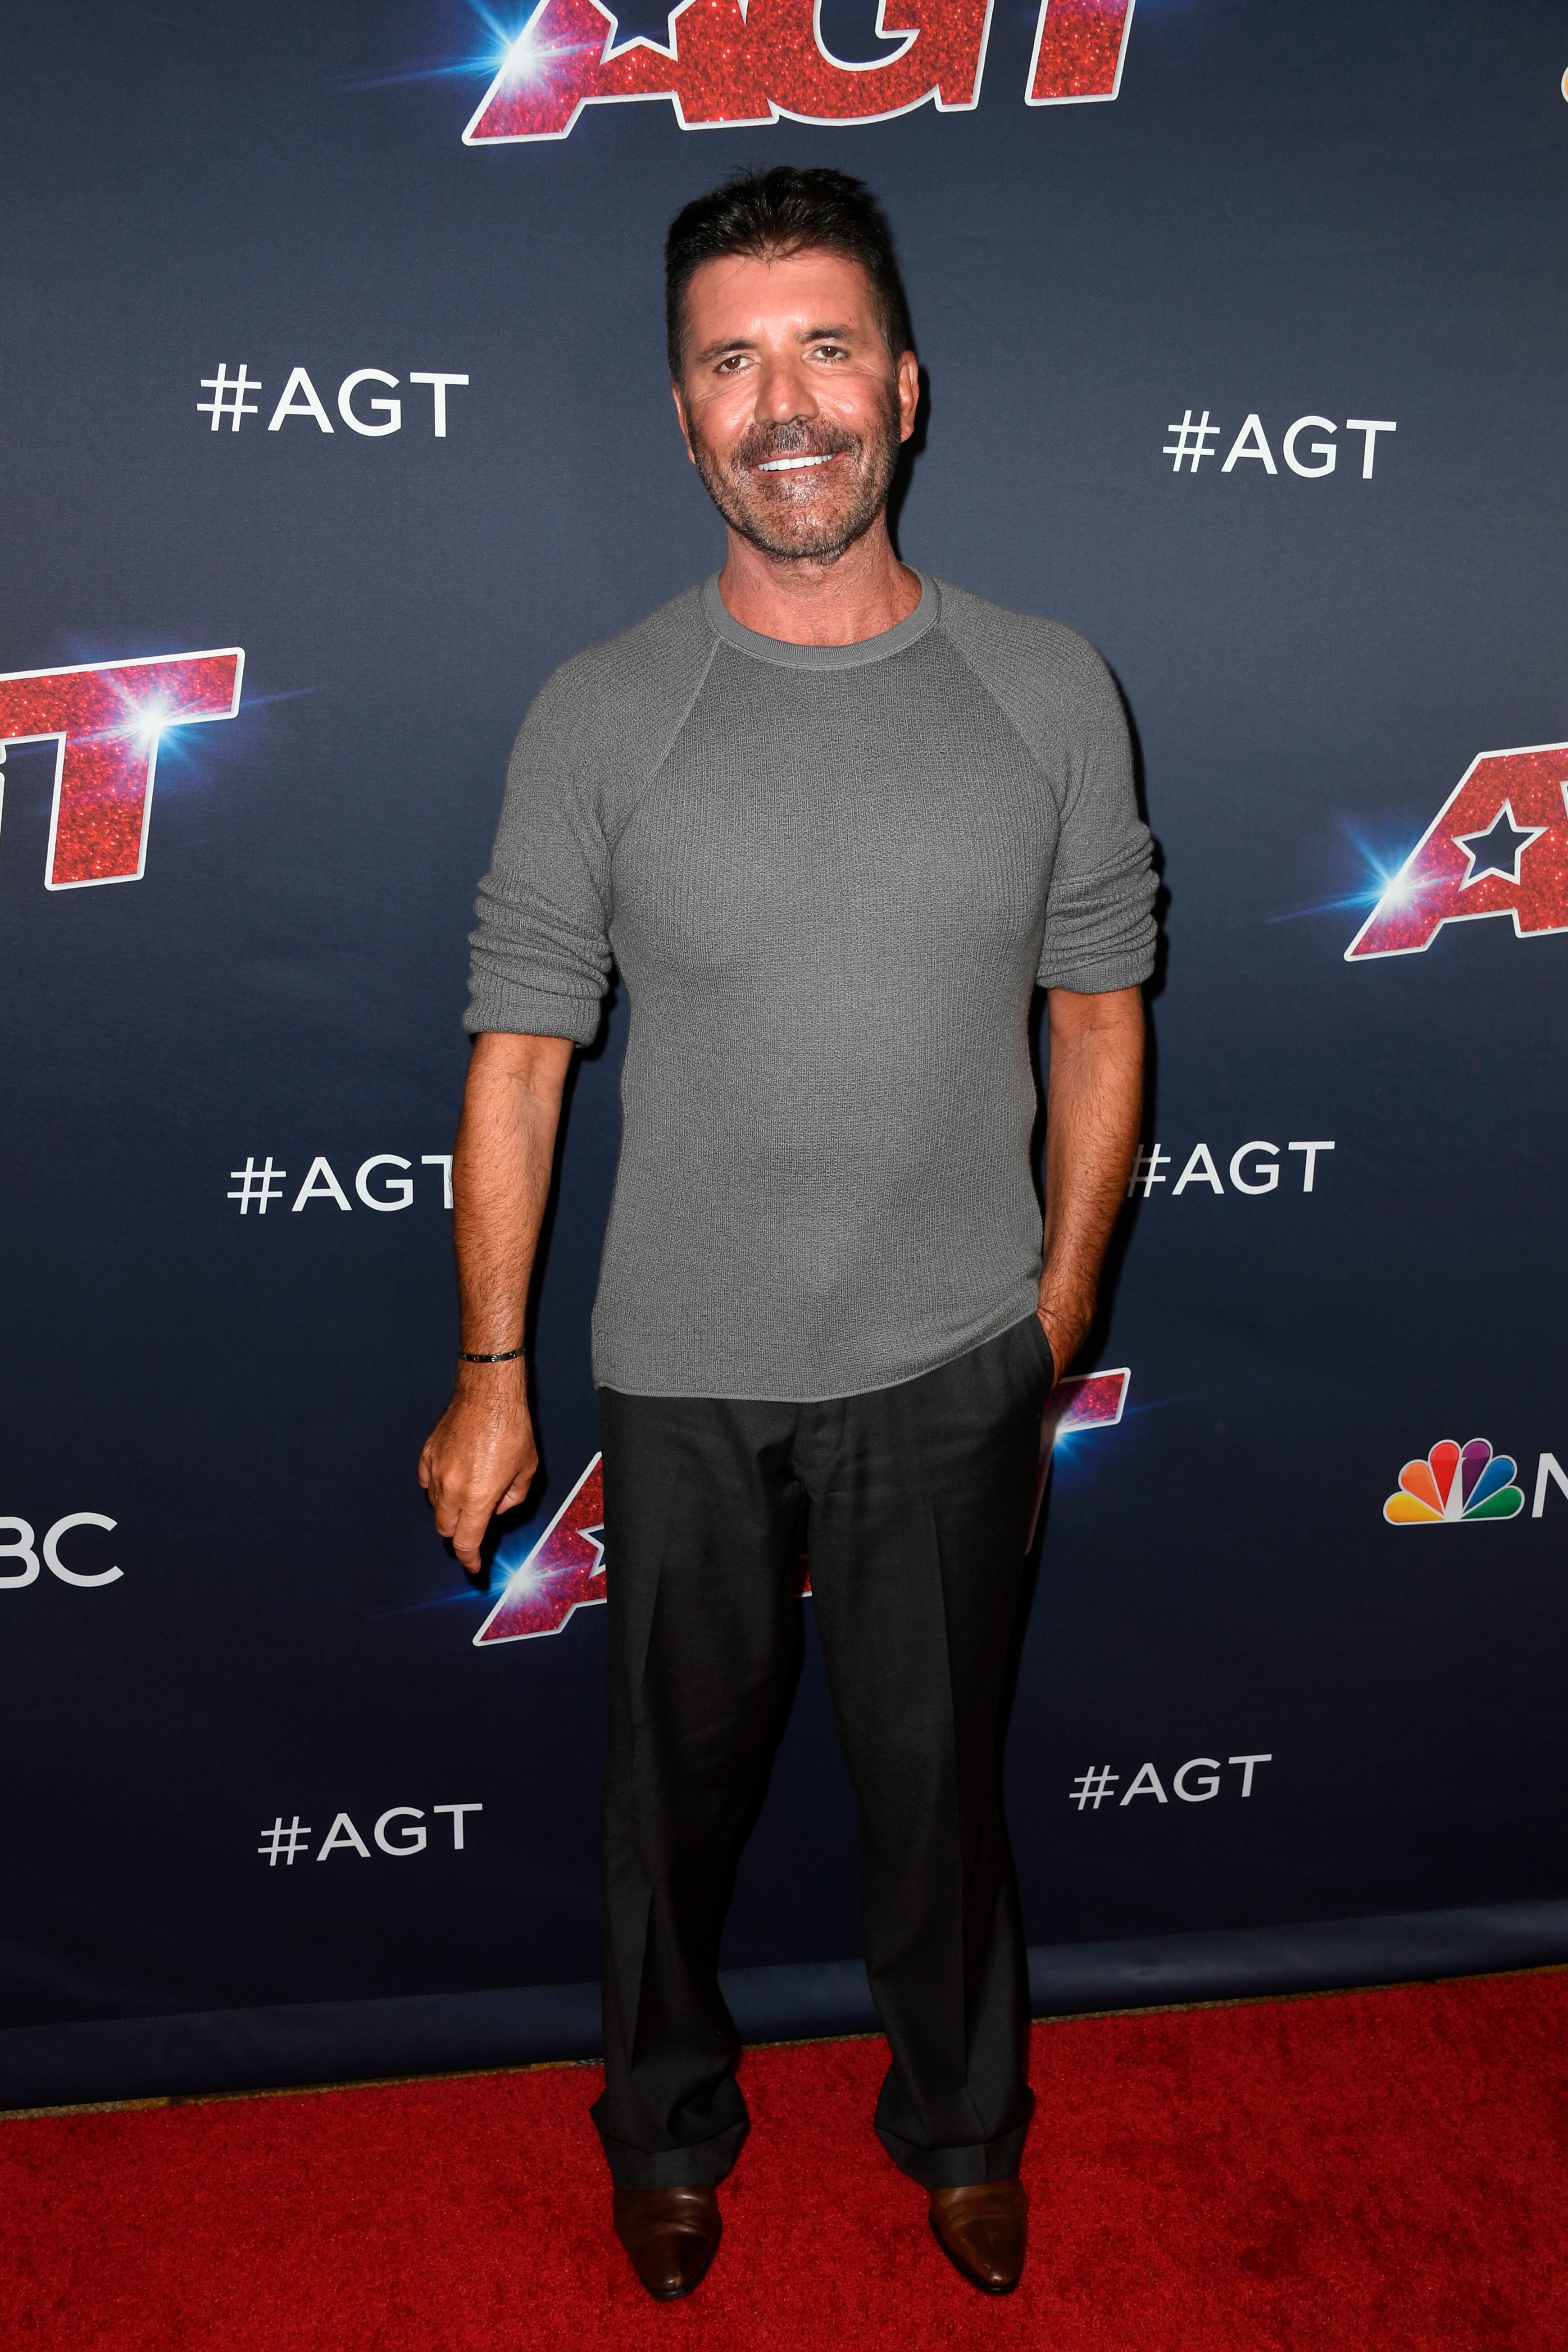 Simon Cowell attends "America's Got Talent" Season 14 Live Show at Dolby Theatre on August 13, 2019| Photo: Getty Images 